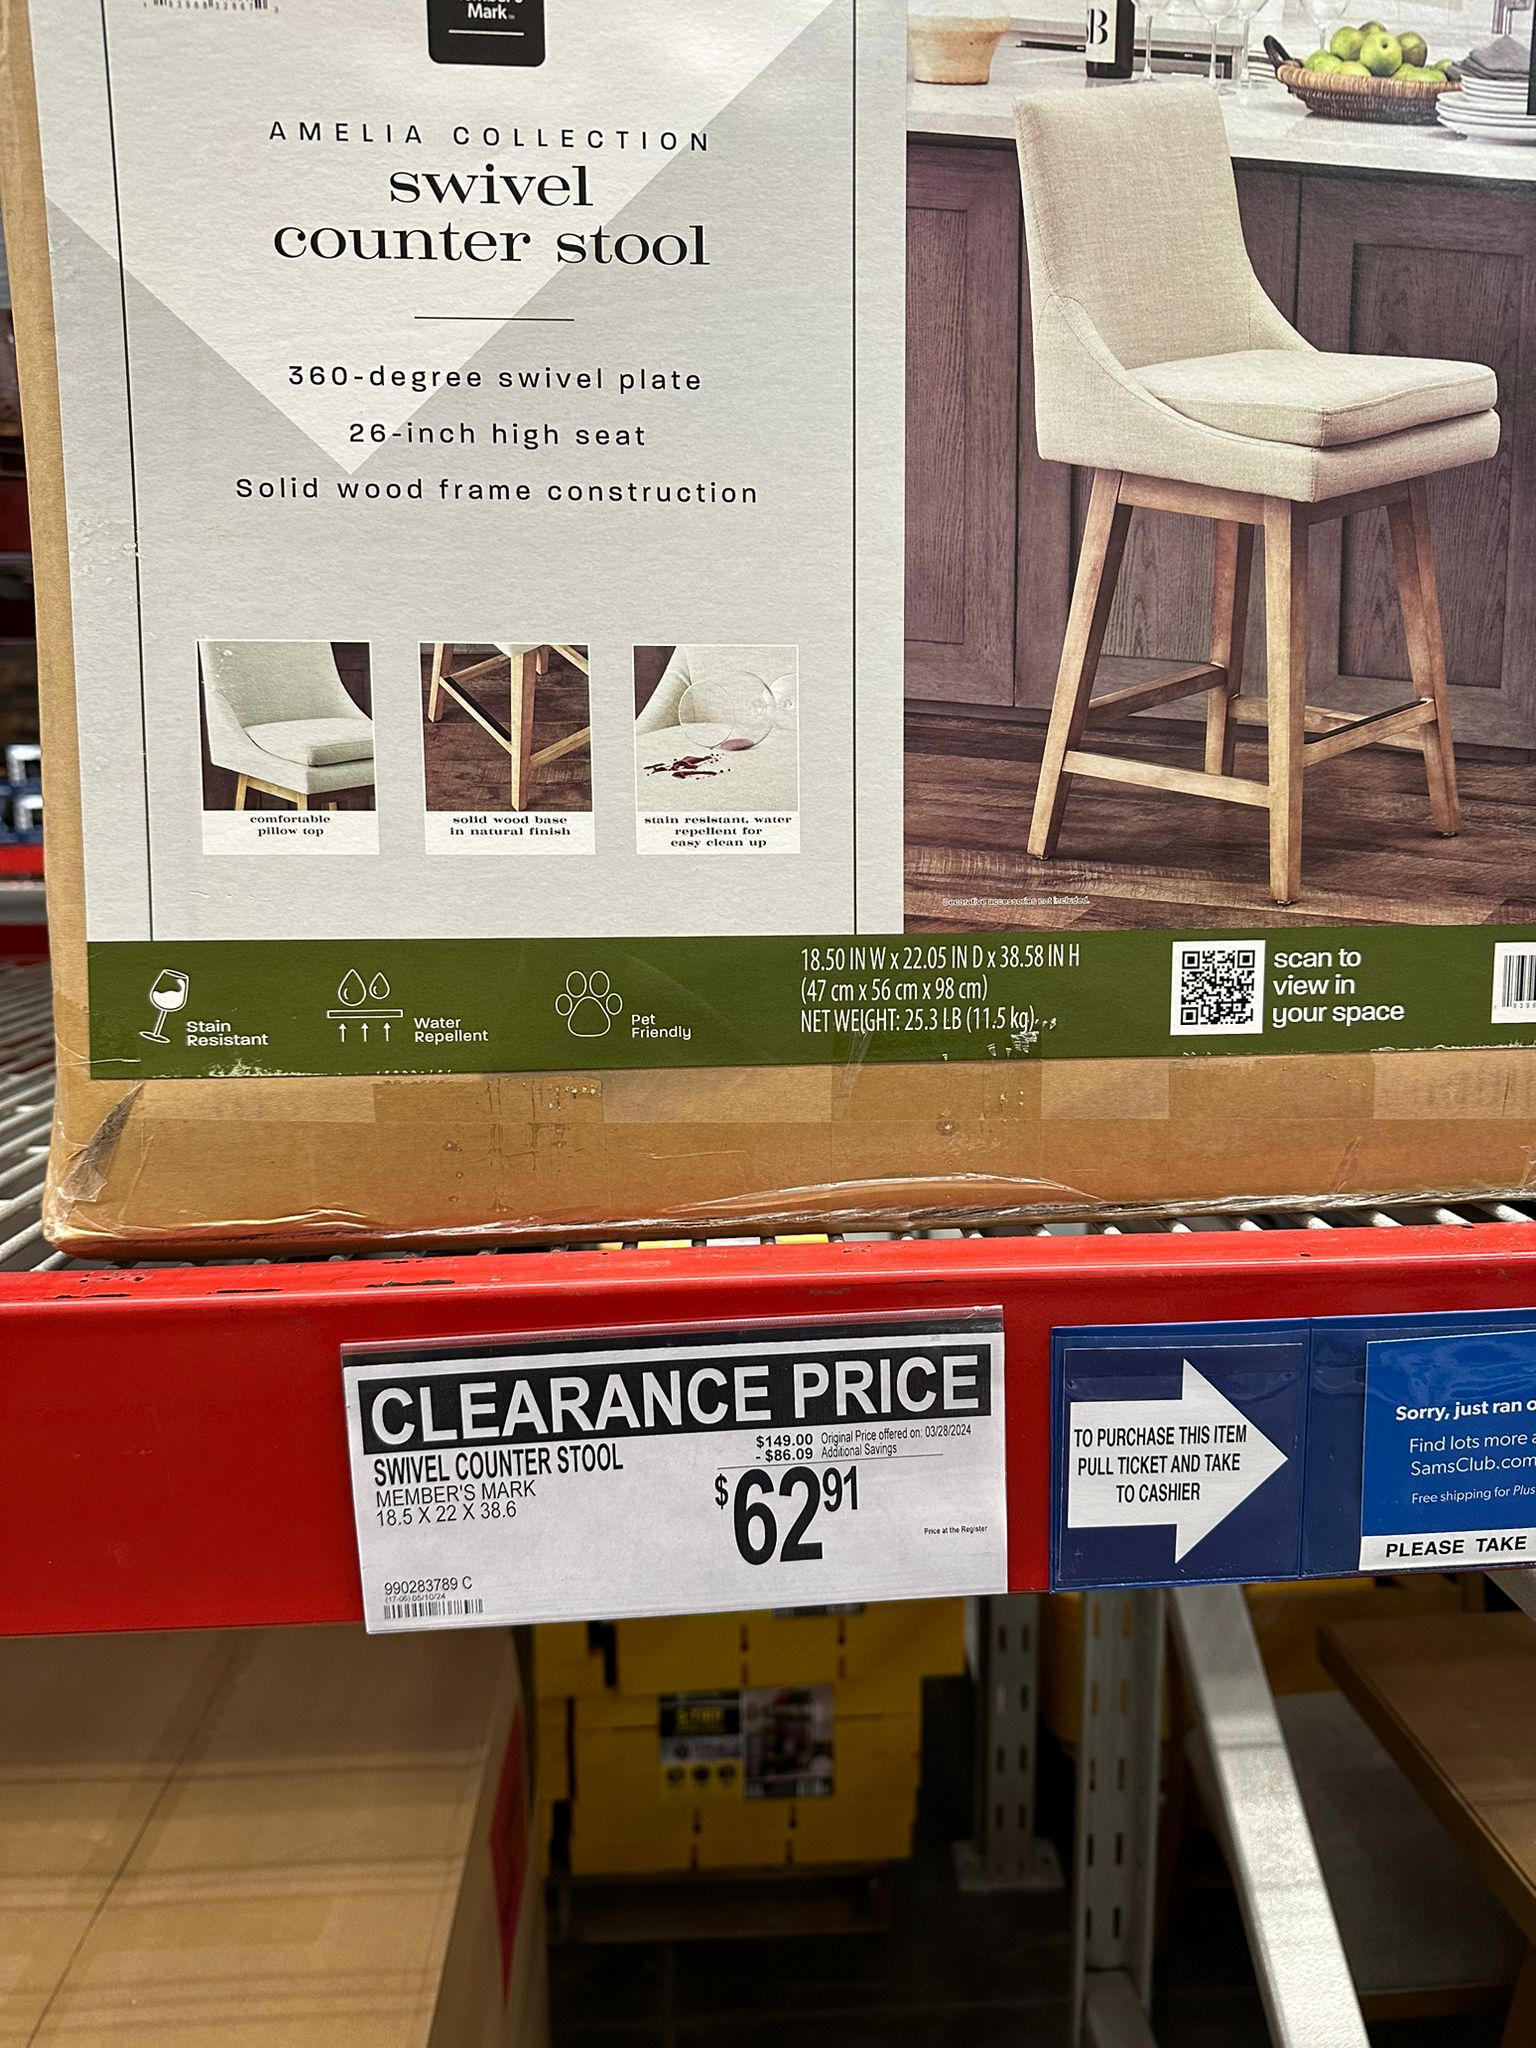 YMMV In-Store Only Member's Mark Amelia Collection Swivel Counter Stool - Sam's Club $62.91